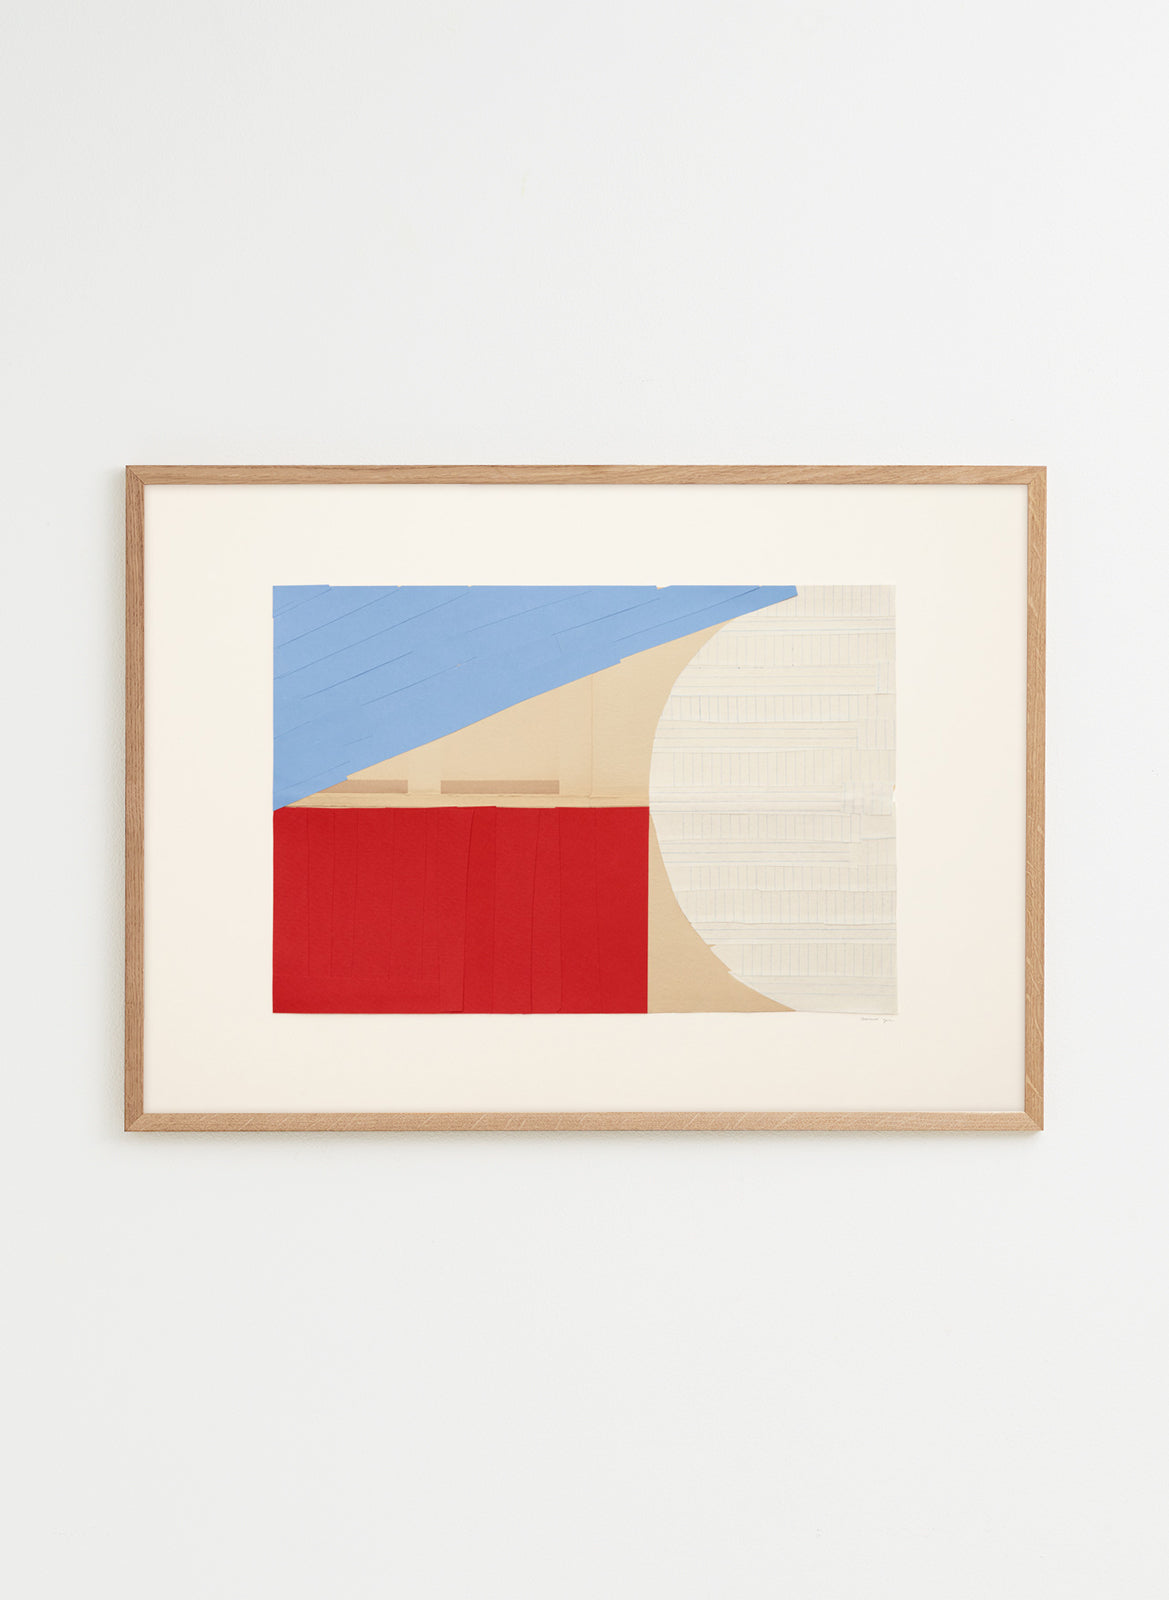 Blue, red and white poster made by atelier cph